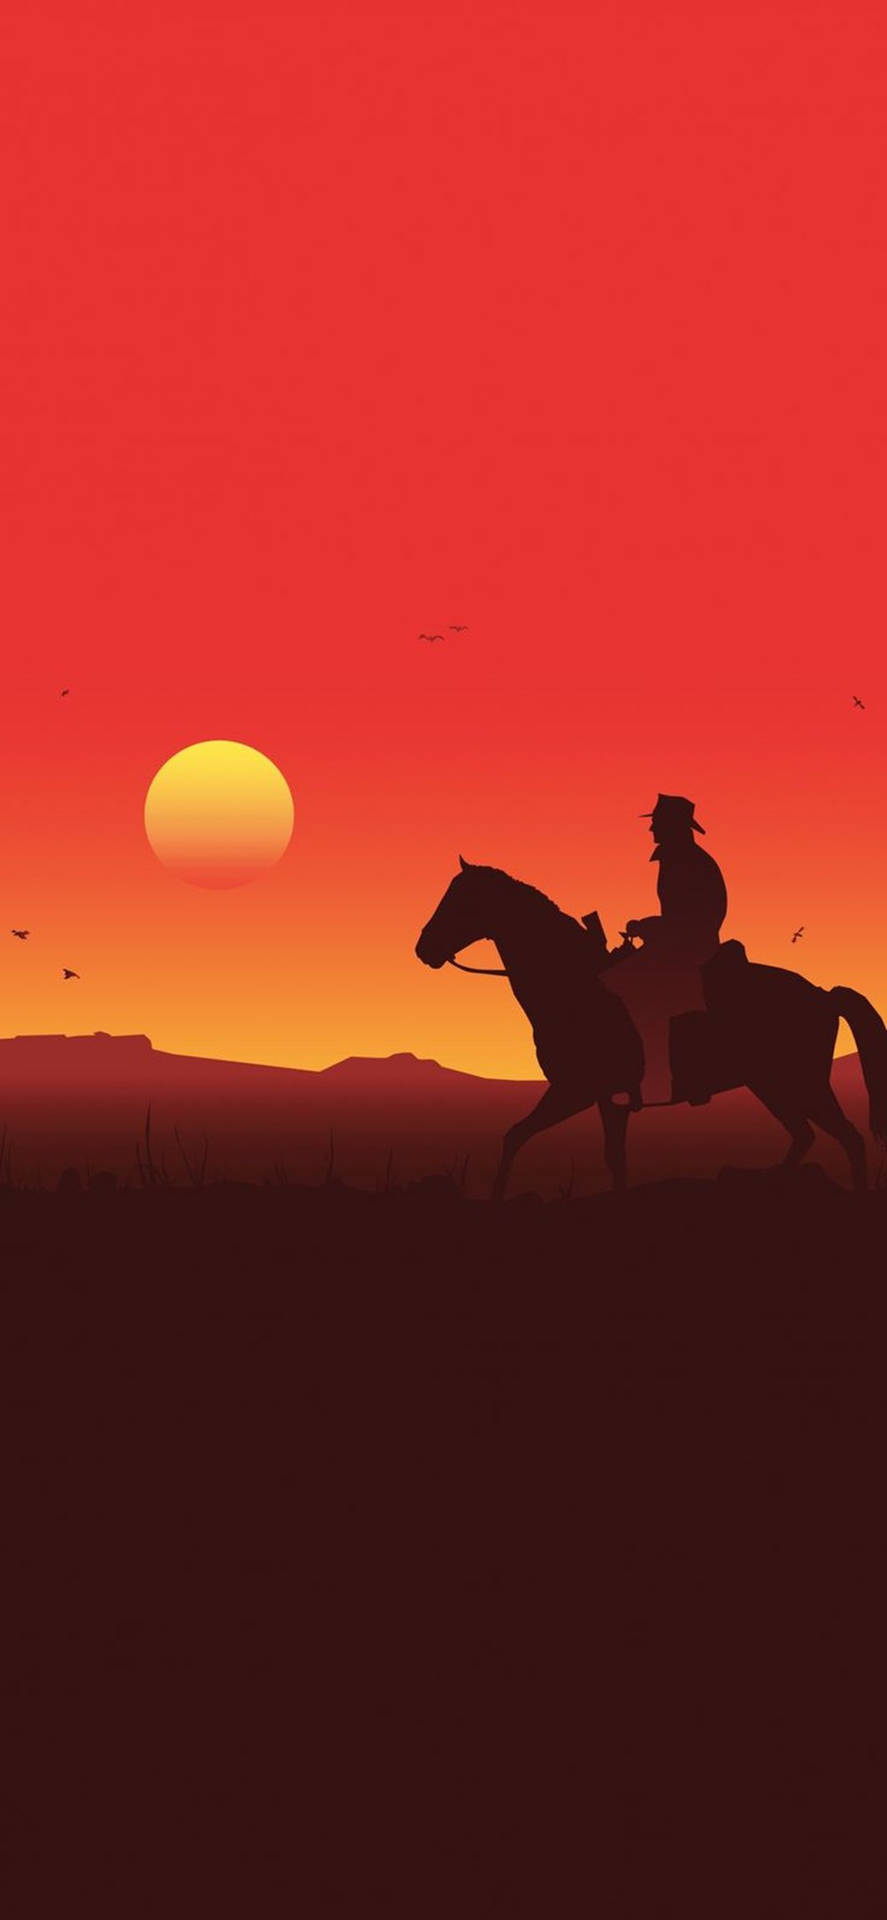 Meet the mane of the wild west - Arthur Morgan's horse in Red Dead Redemption 2 Wallpaper